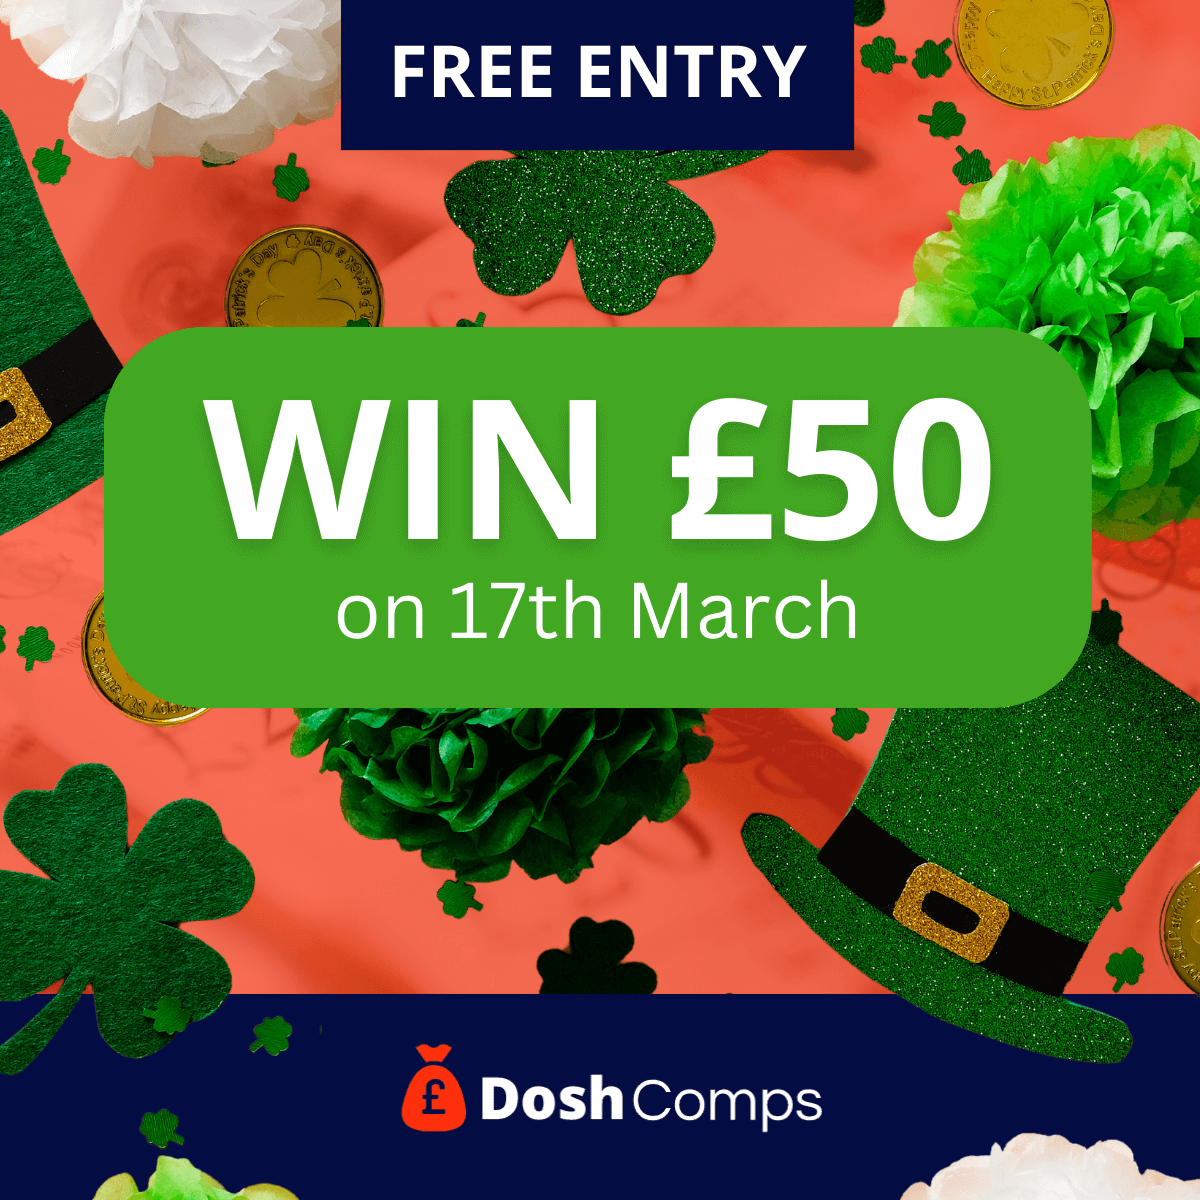 Don't miss your chance to win £50 cash! 👍😀 Enter for FREE at 👉 doshcomps.co.uk #prizes #prizesuk #prizedraw #freeentrycompetitions #freebiesuk #giveaway #prizewinner #prizegiveway #winners #competitionuk #prizesuk #win #doshcomps